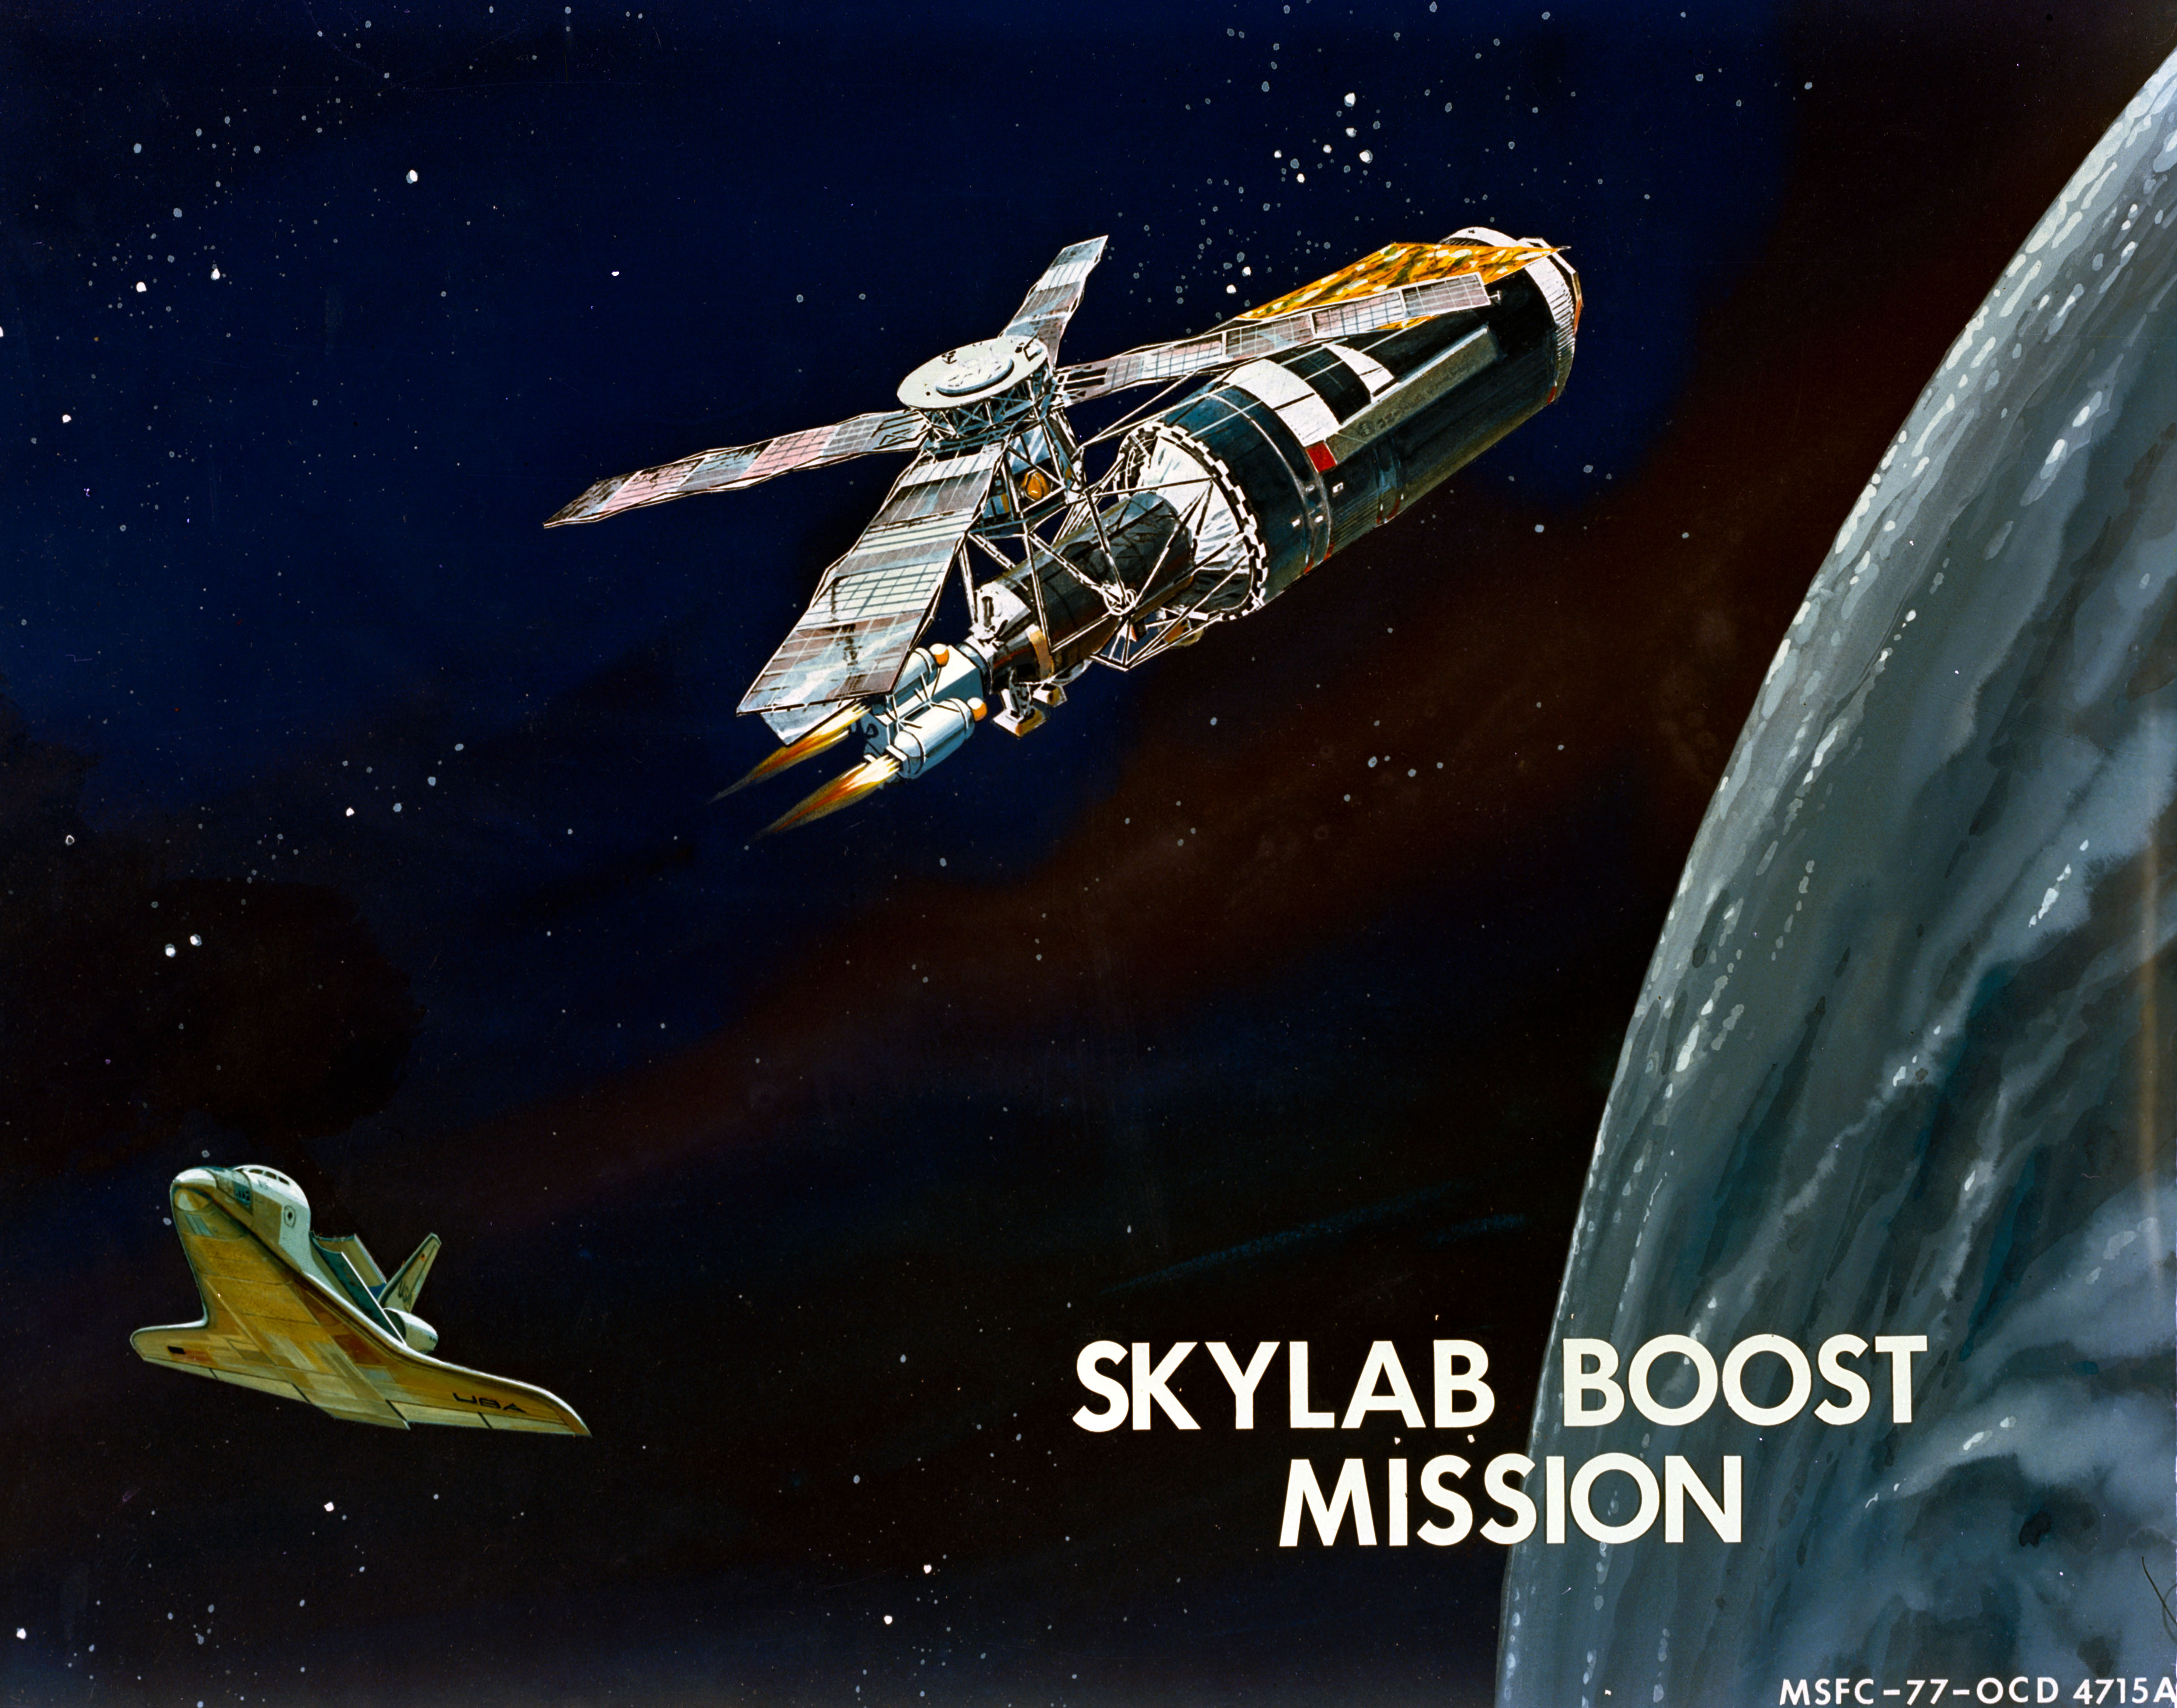 Illustration of a possible Skylab reboost mission by a space shuttle